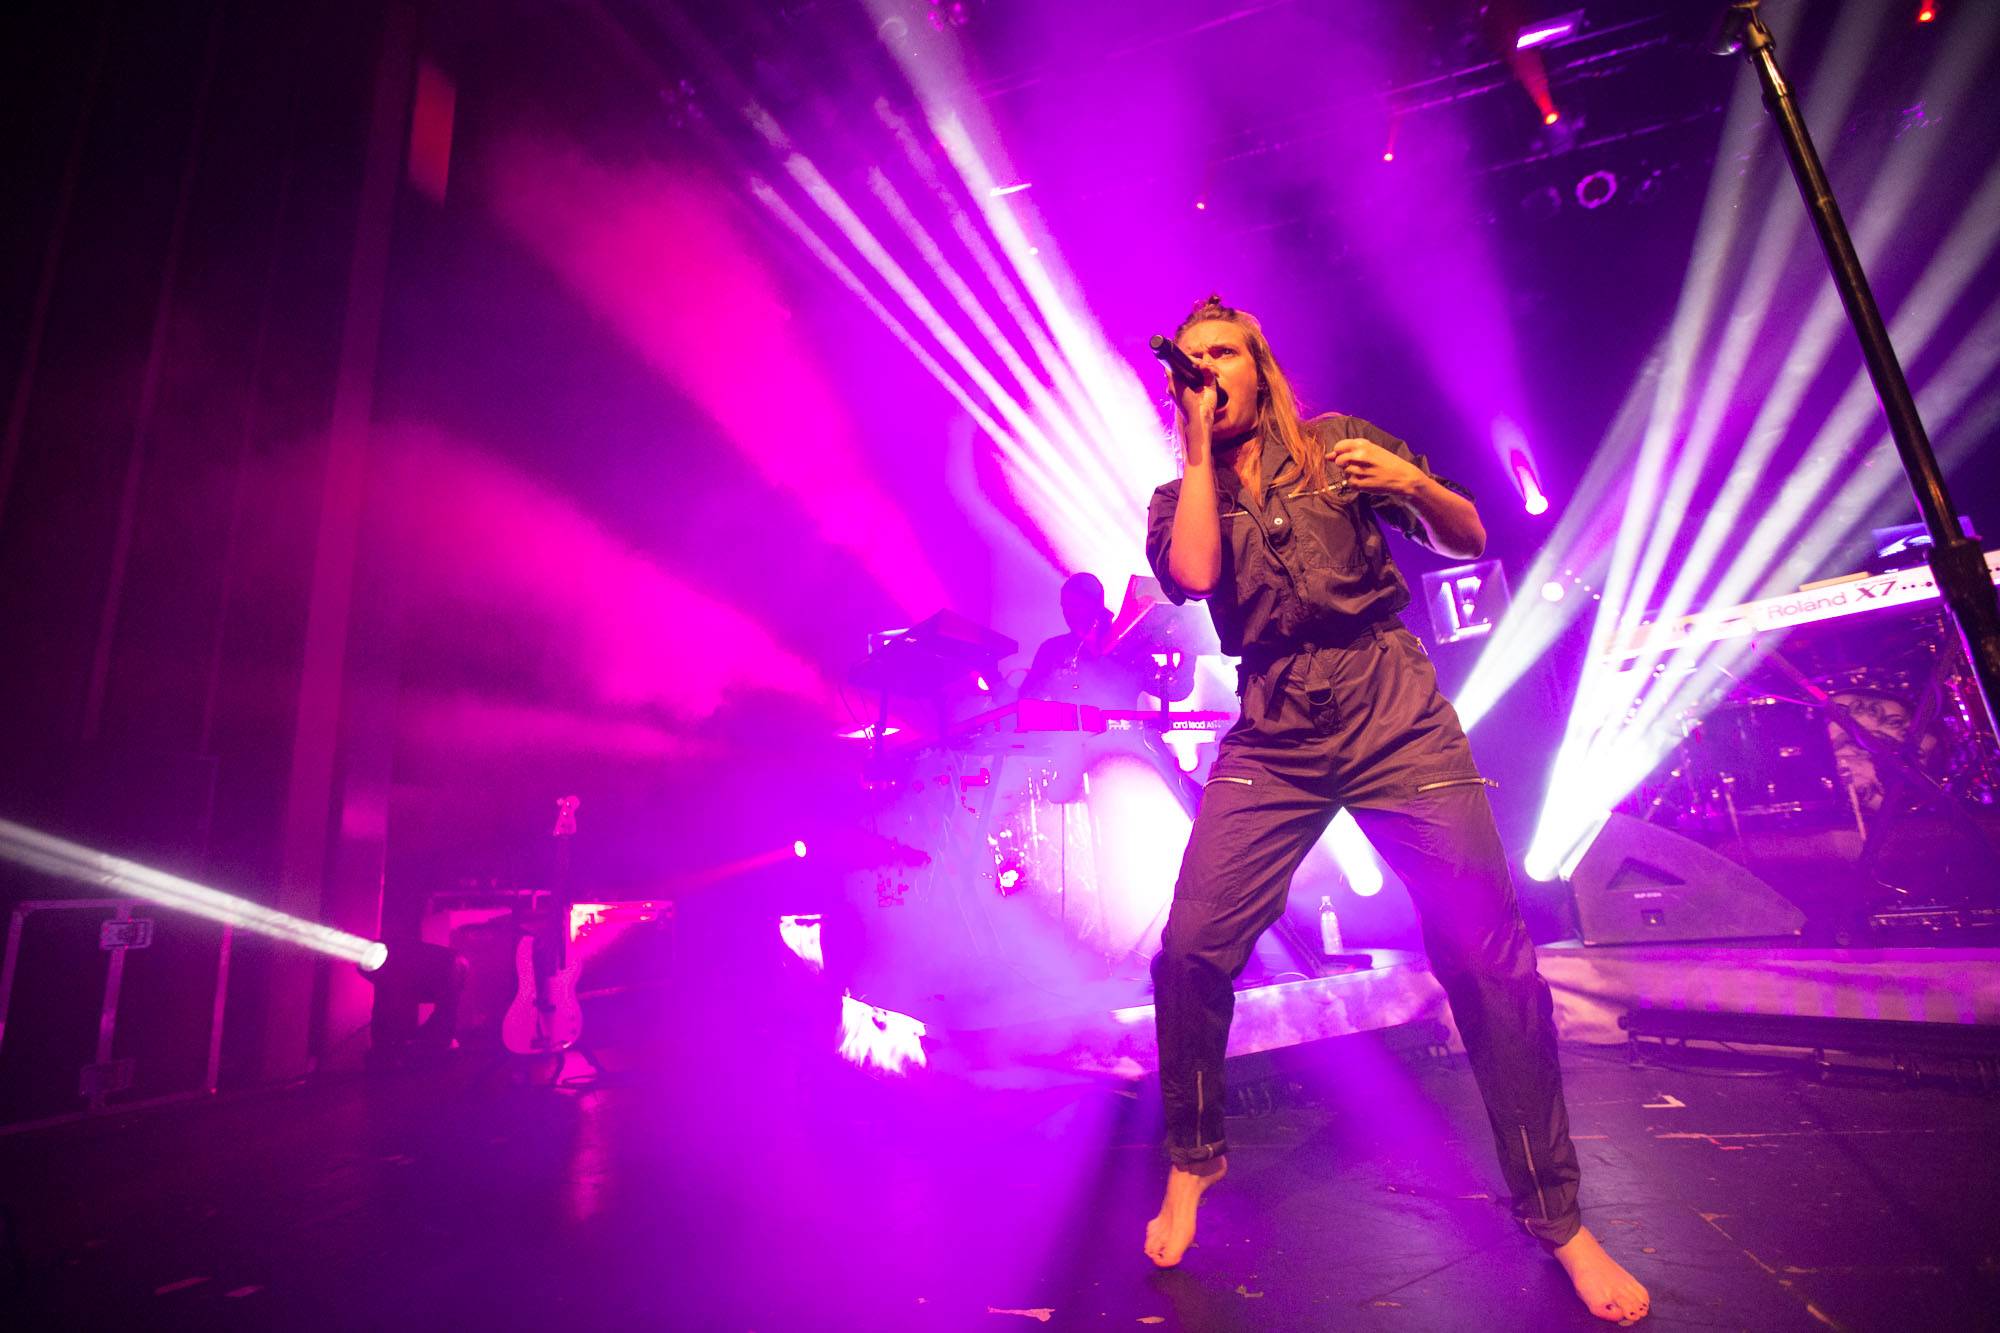 Tove Lo at the Vogue Theatre, Vancouver, Oct 6 2015. Kirk Chantraine photo.